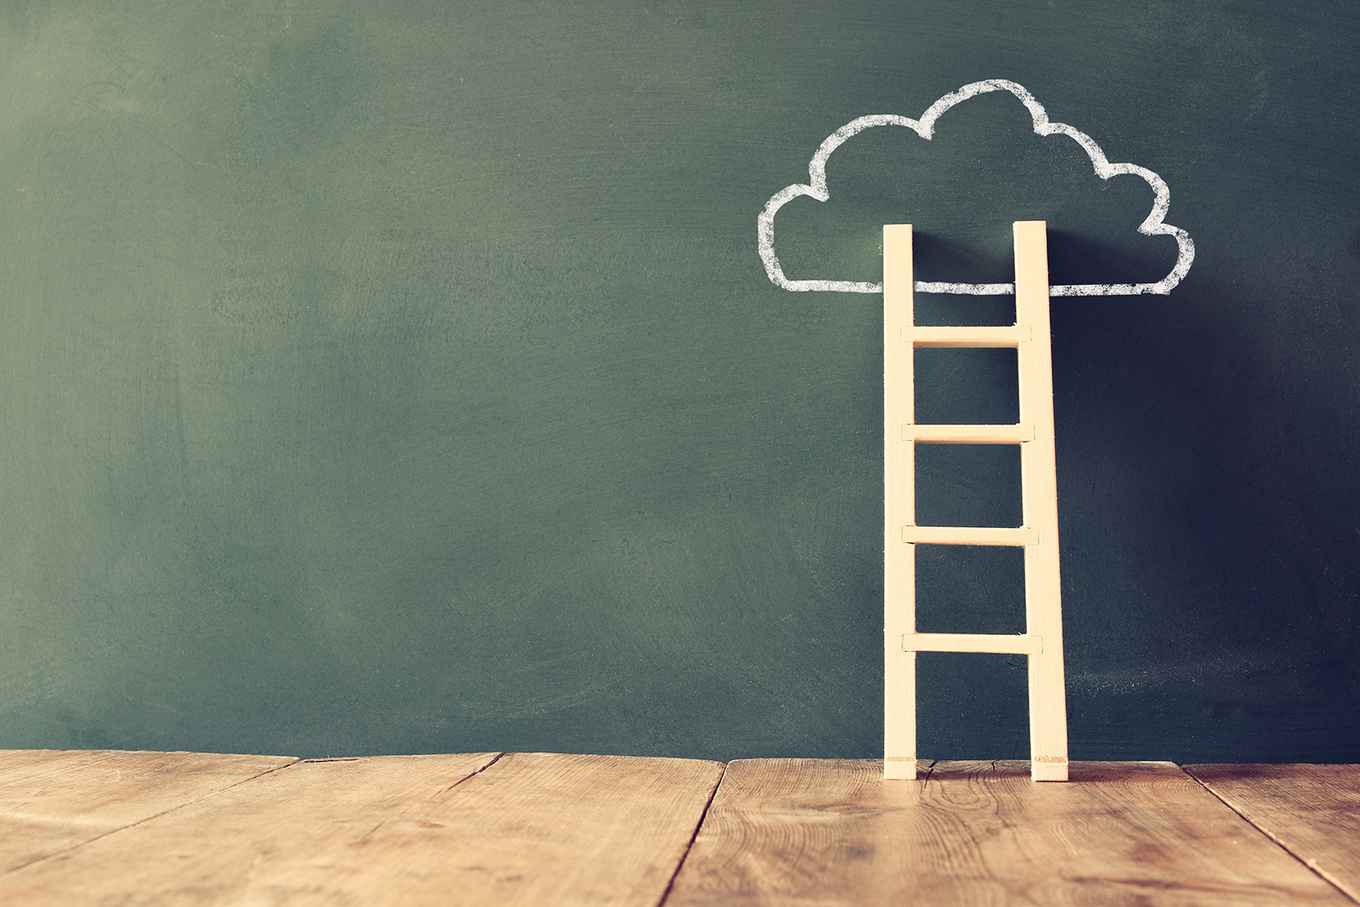 Ladder against schoolboard, on which a small cloud is drawn